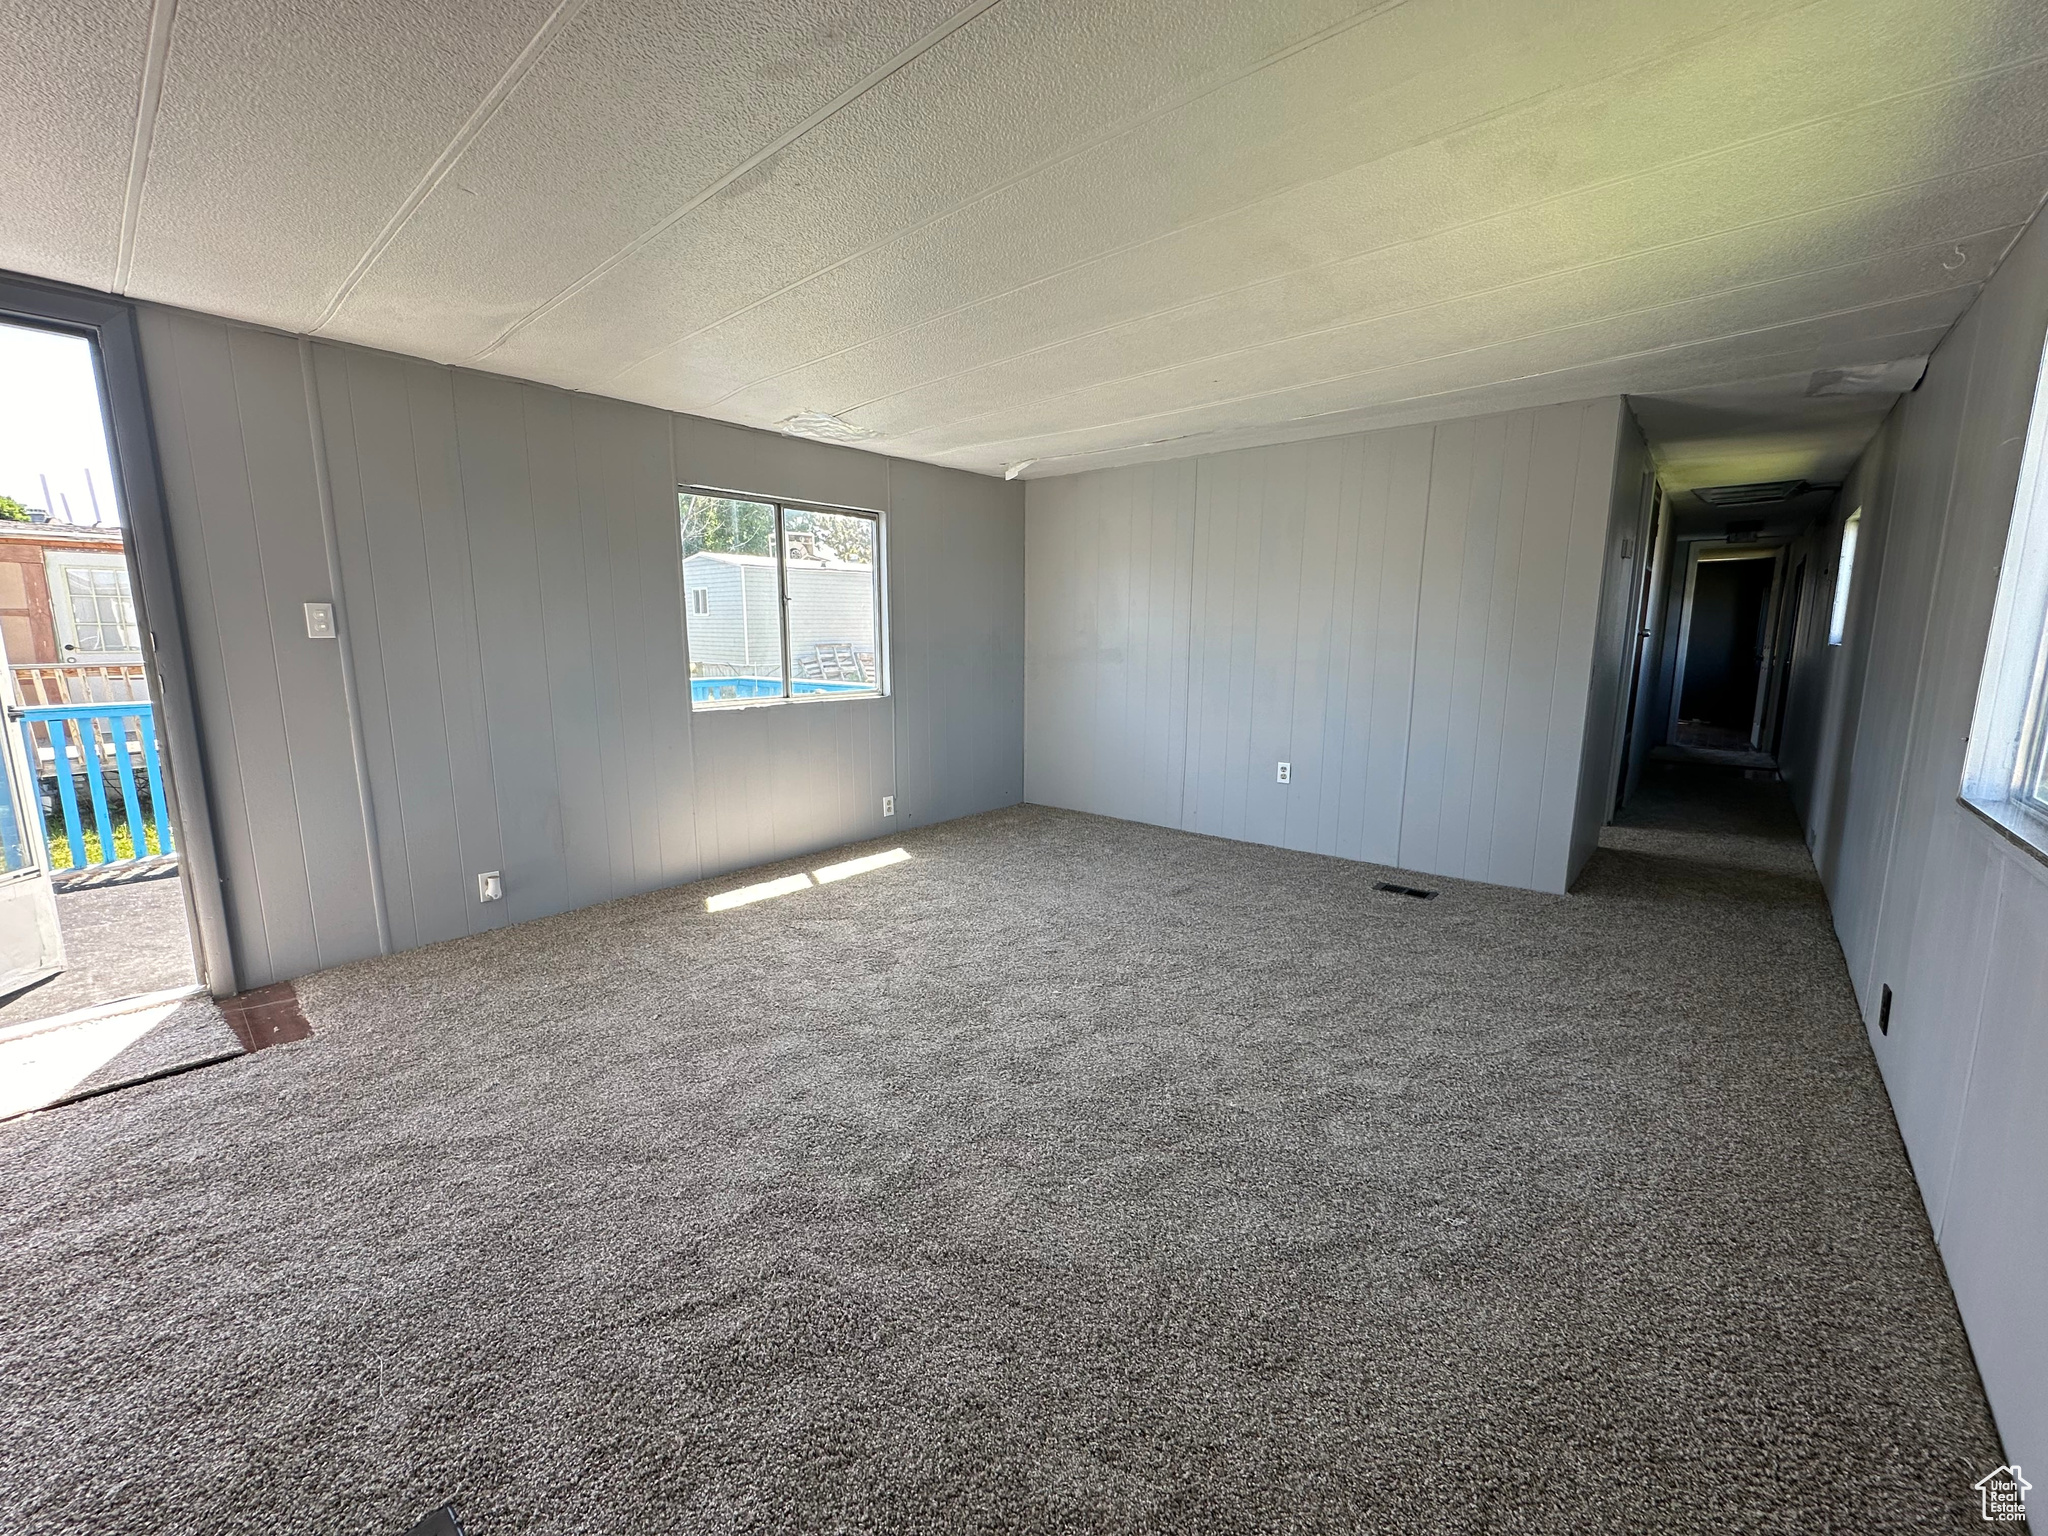 Unfurnished room with a textured ceiling, carpet flooring, and plenty of natural light